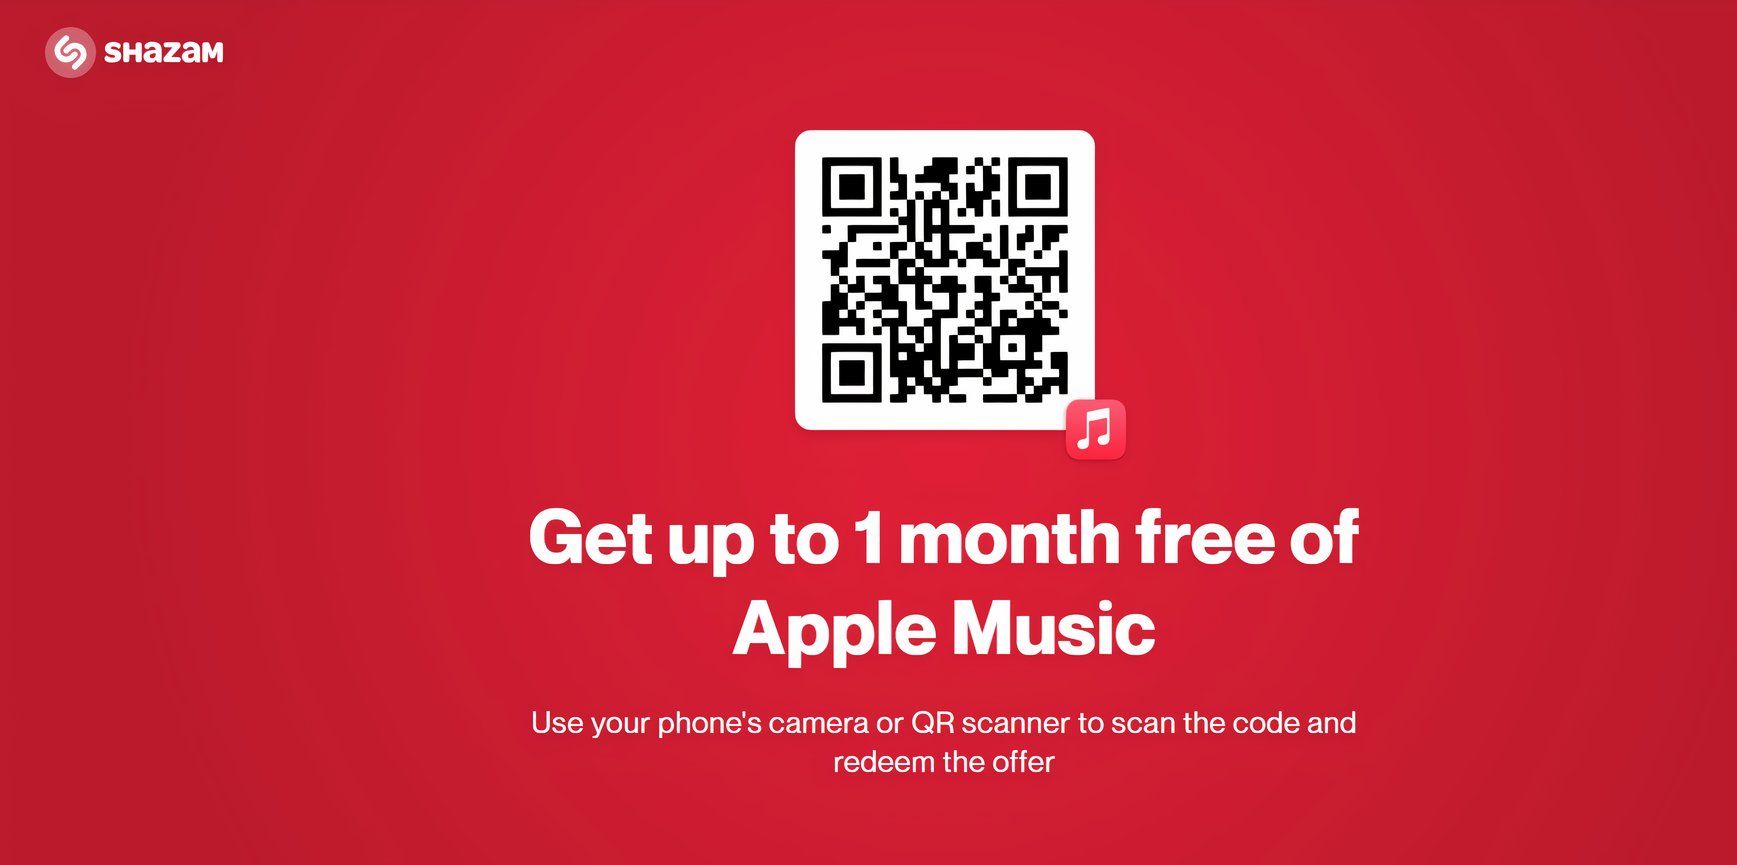 apple music shazam one-month free trial offer